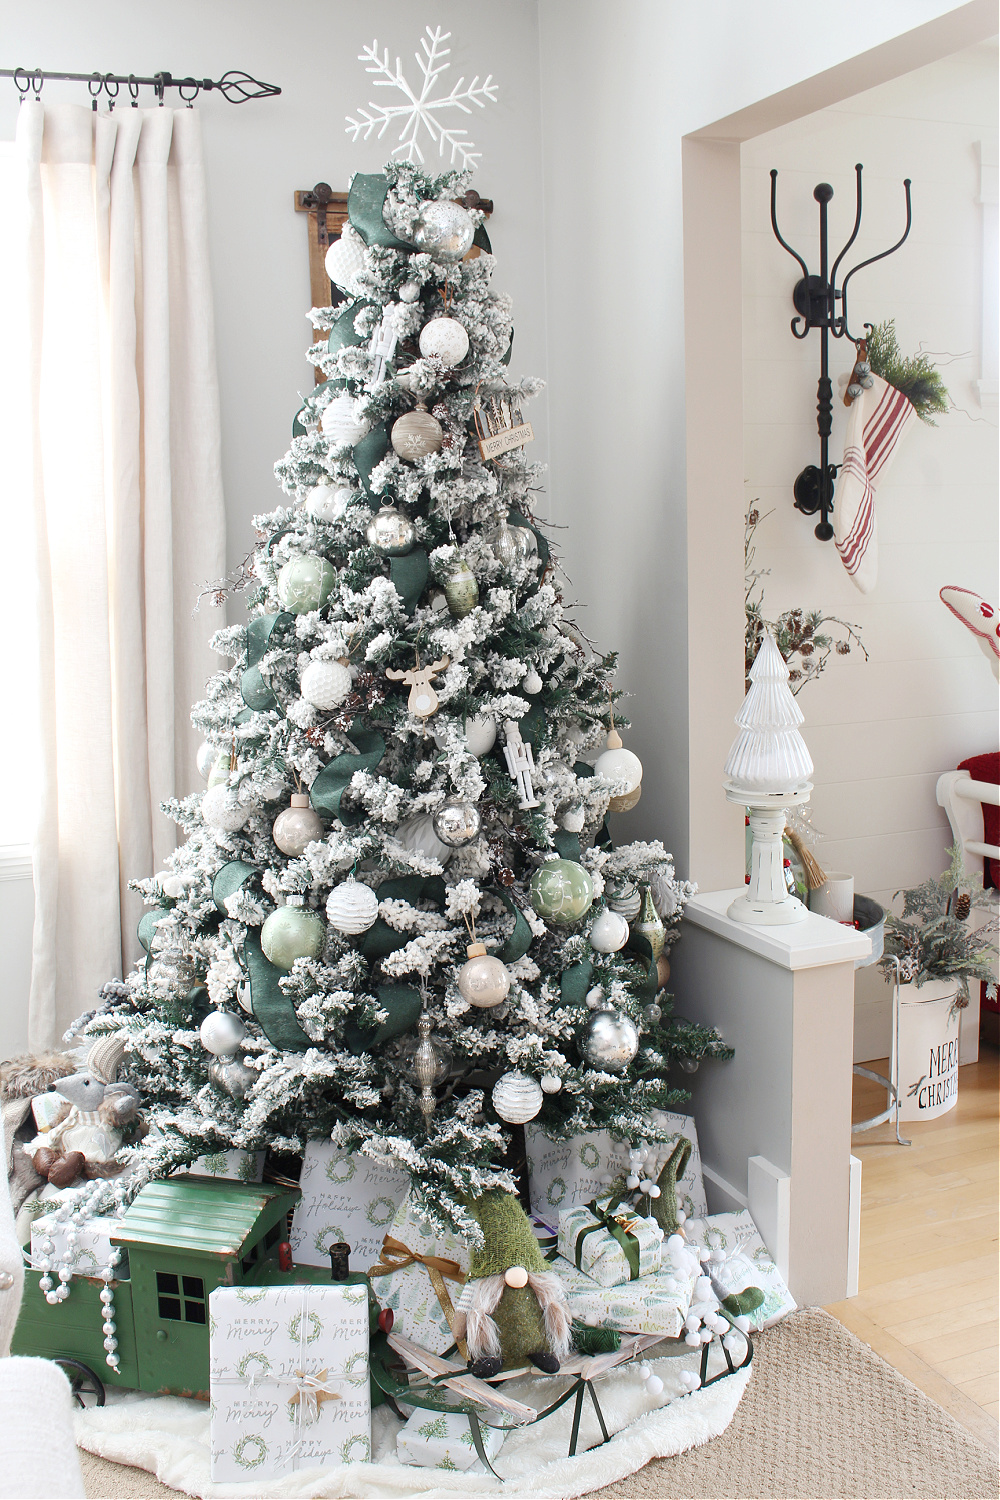 Flocked Christmas tree decorated with green, white and metallics.